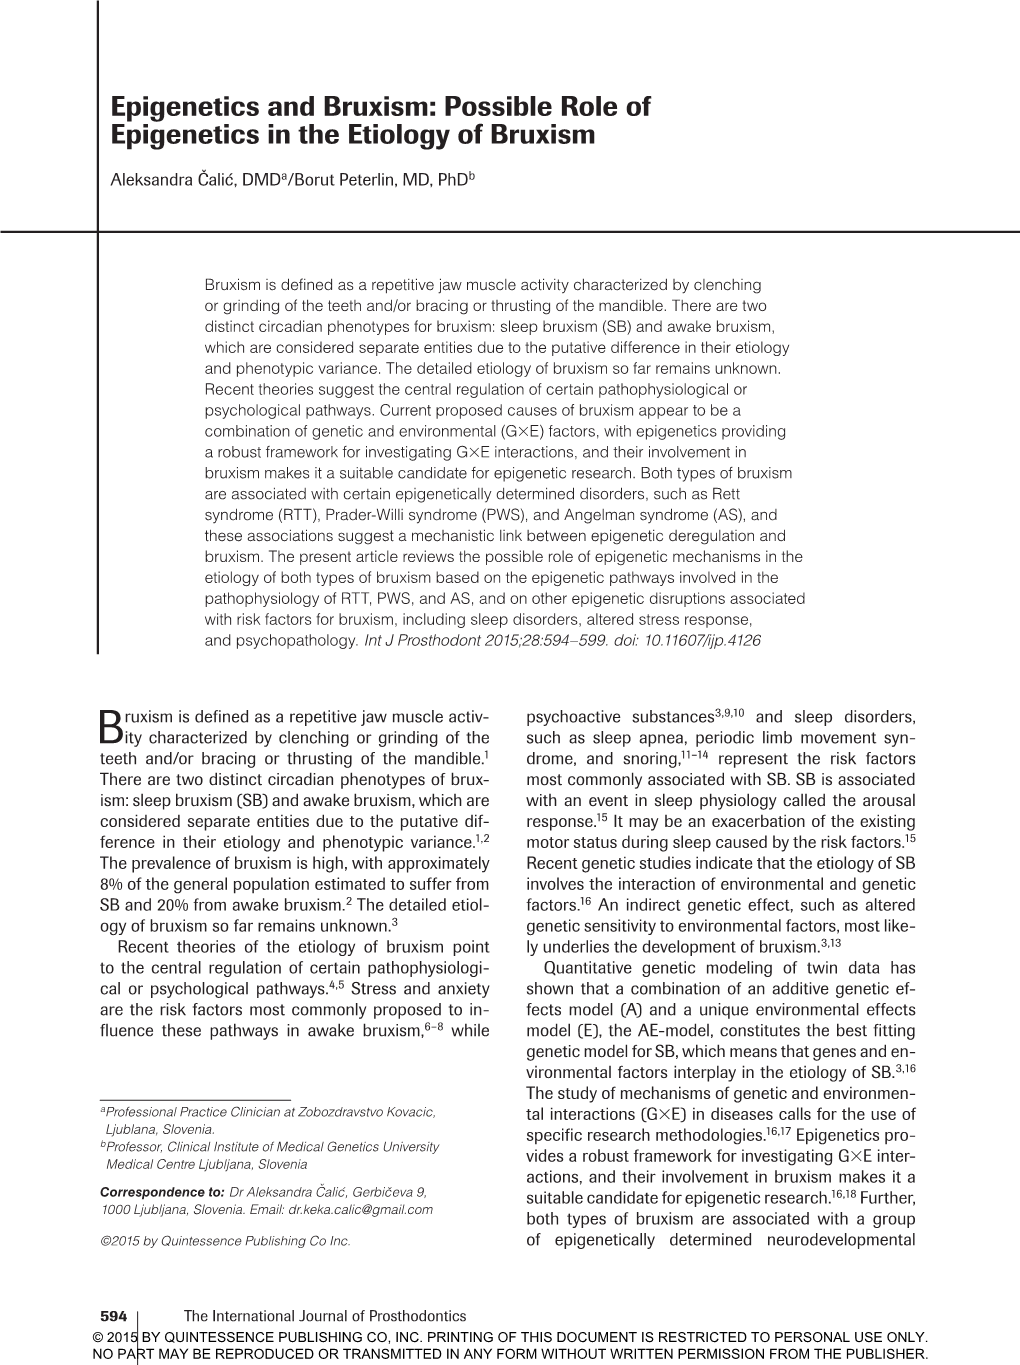 Epigenetics and Bruxism: Possible Role of Epigenetics in the Etiology of Bruxism